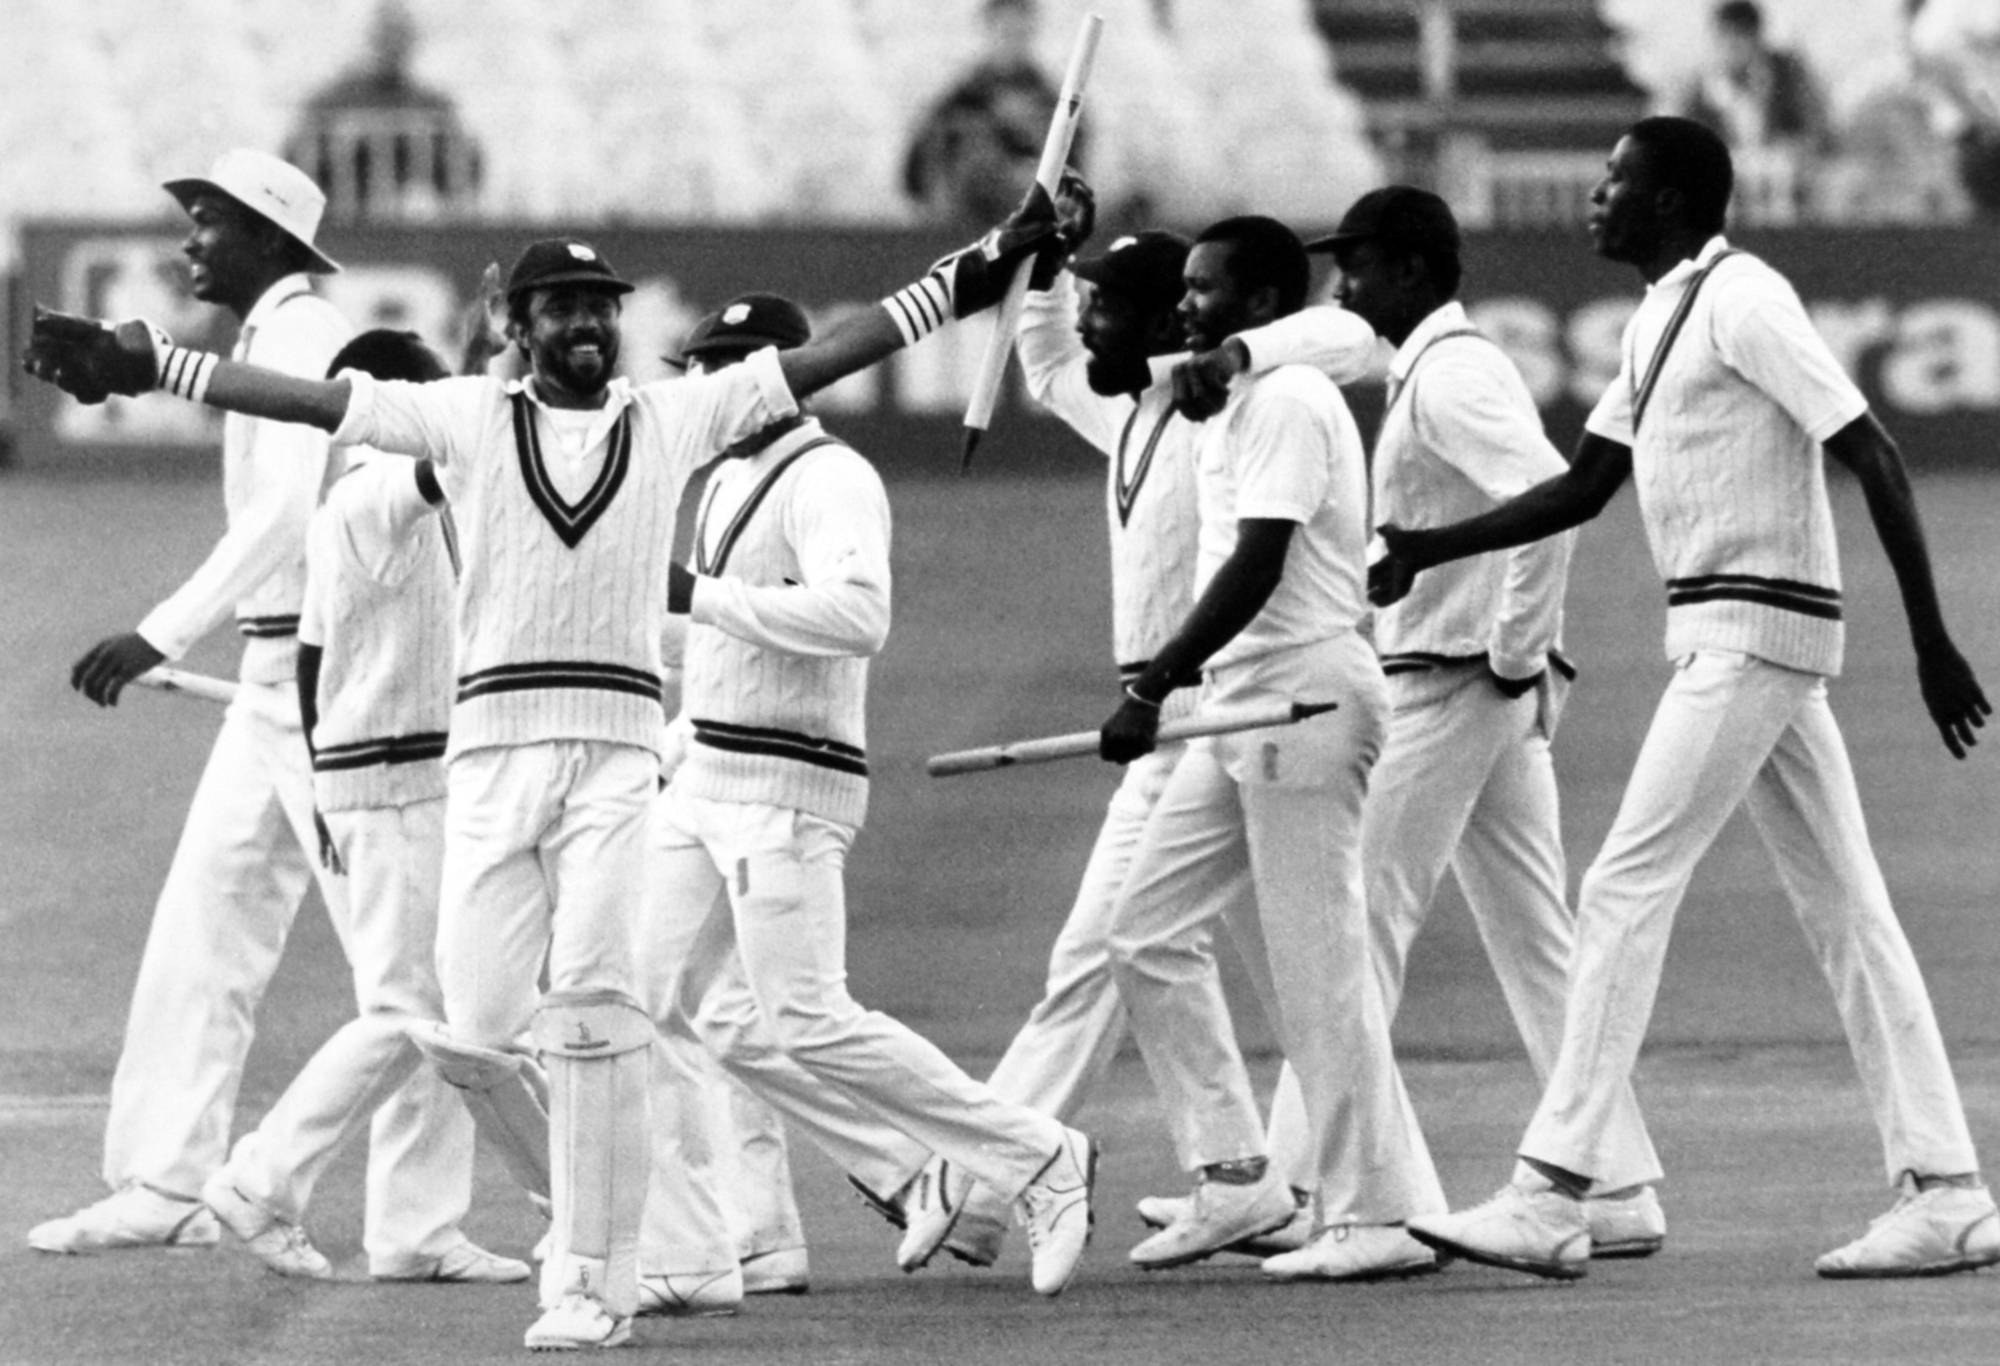 West Indies wicket-keeper Jeff Dujon (left) waves a stump at the crowd, whilst Viv Richards puts his arm around team mate Malcom Marshall as they celebrate with the rest of a victorious team (Photo by PA Images via Getty Images)